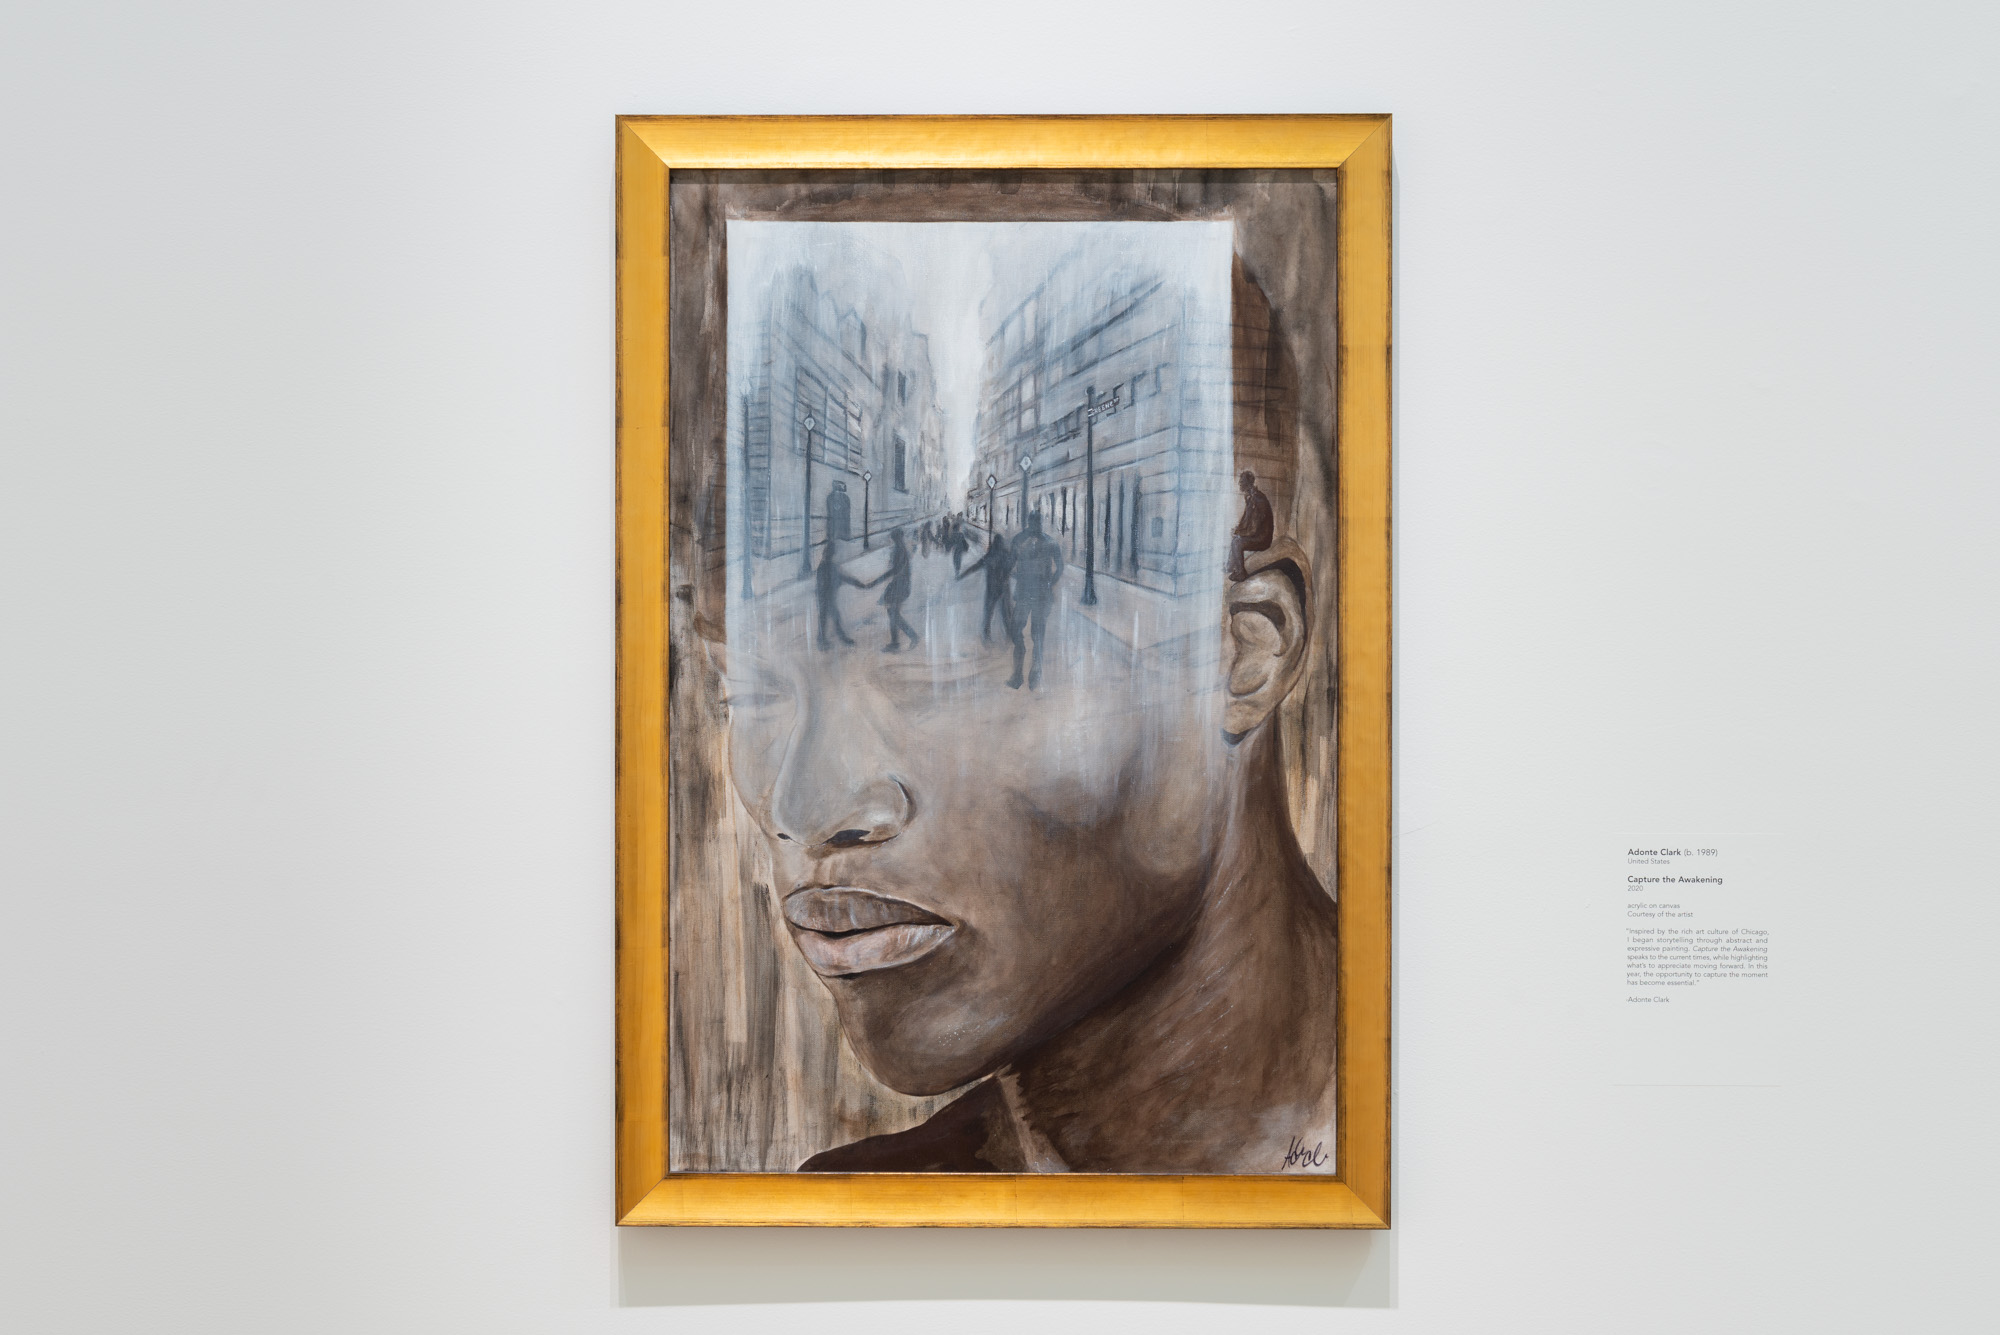 Adonte Clark's Capture the Awakening, a dull grey painting of an African American man's head. A black and white, rectangular scene of silhouettes walking down a city street covers the man's forehead and fades away towards the bottom only slightly obscuring the man's closed eyes